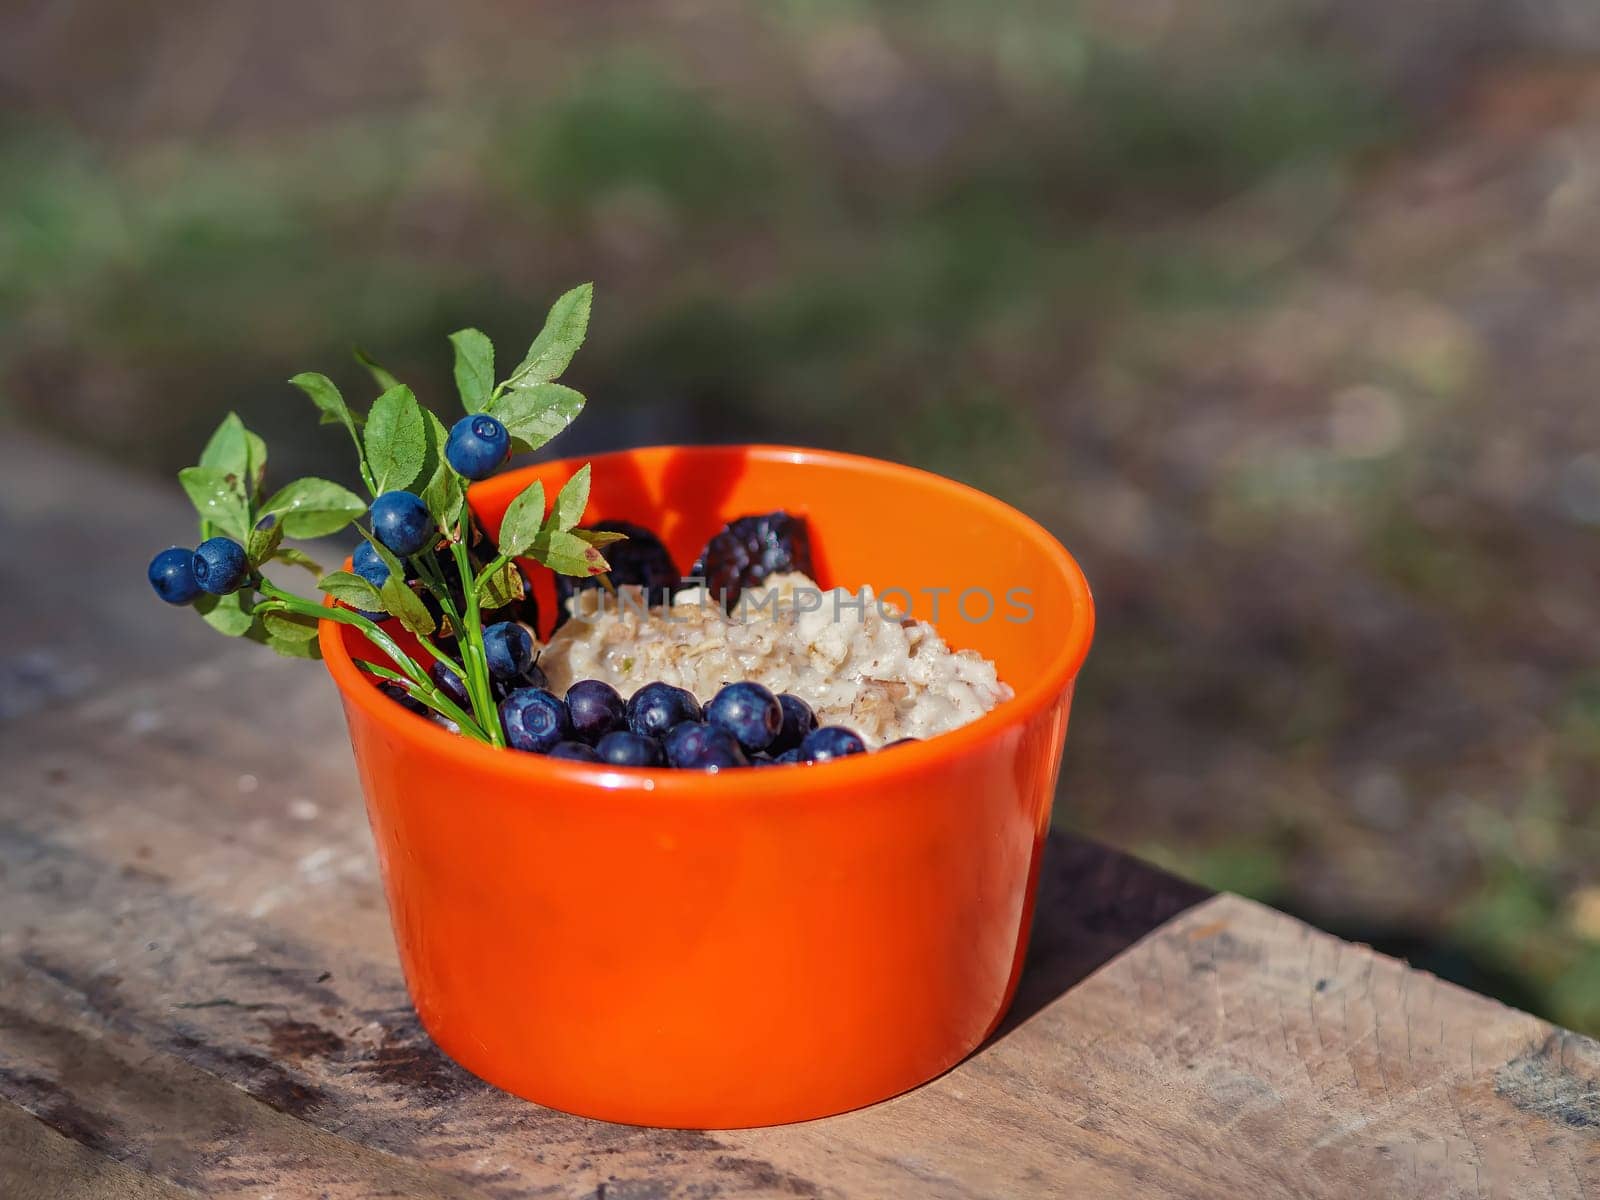 Oatmeal with blueberries in an orange plate on the nature in the forest. Hiker's breakfast. by Andre1ns